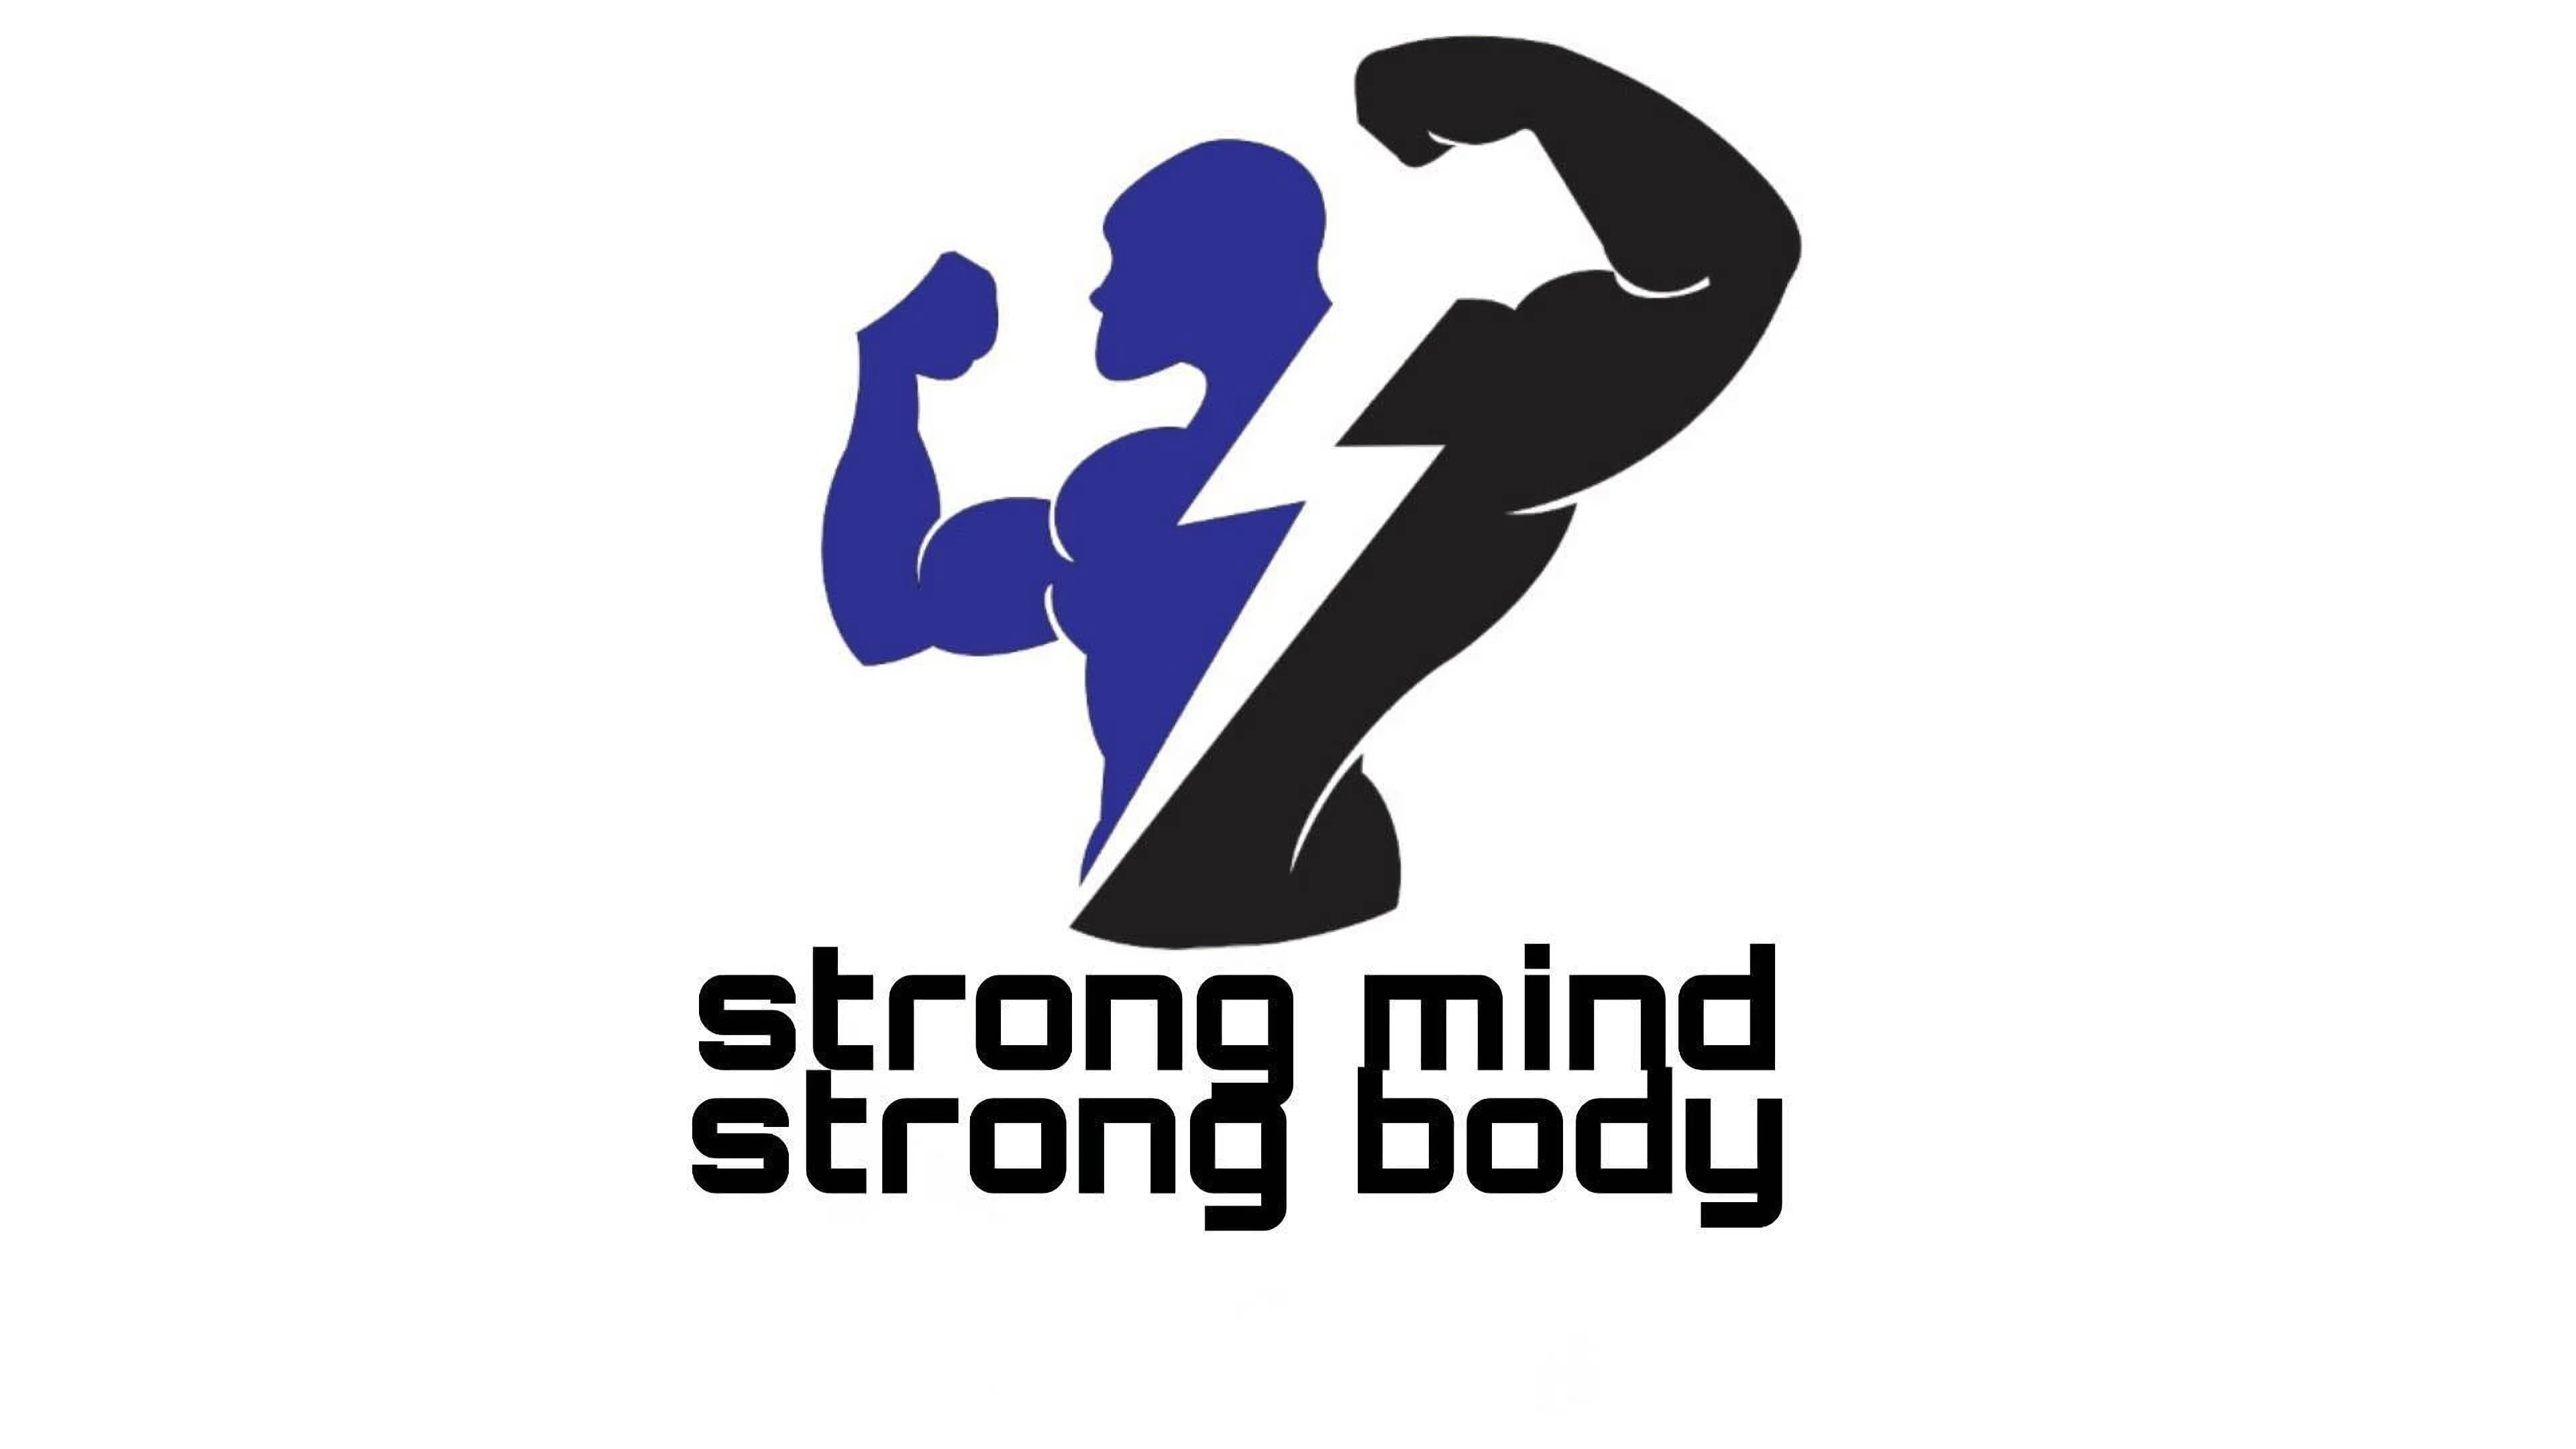 Gimnasio-strong-mind-strong-body-6813